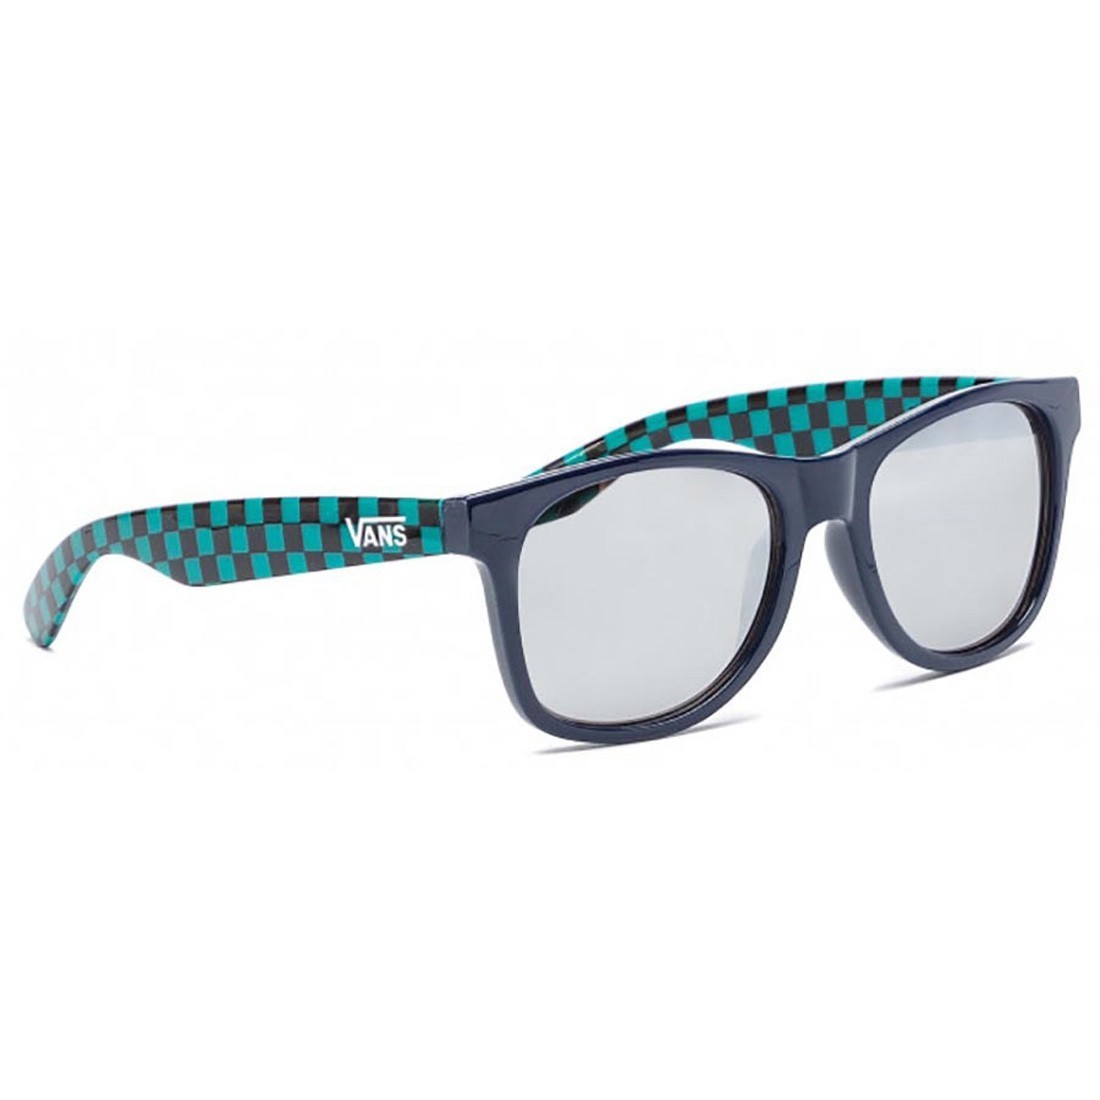 Buy Vans Spicoli 4 Sunglasses, Dress Blue CheckerBoard - Vans, delivered to  your home | TheOutfit